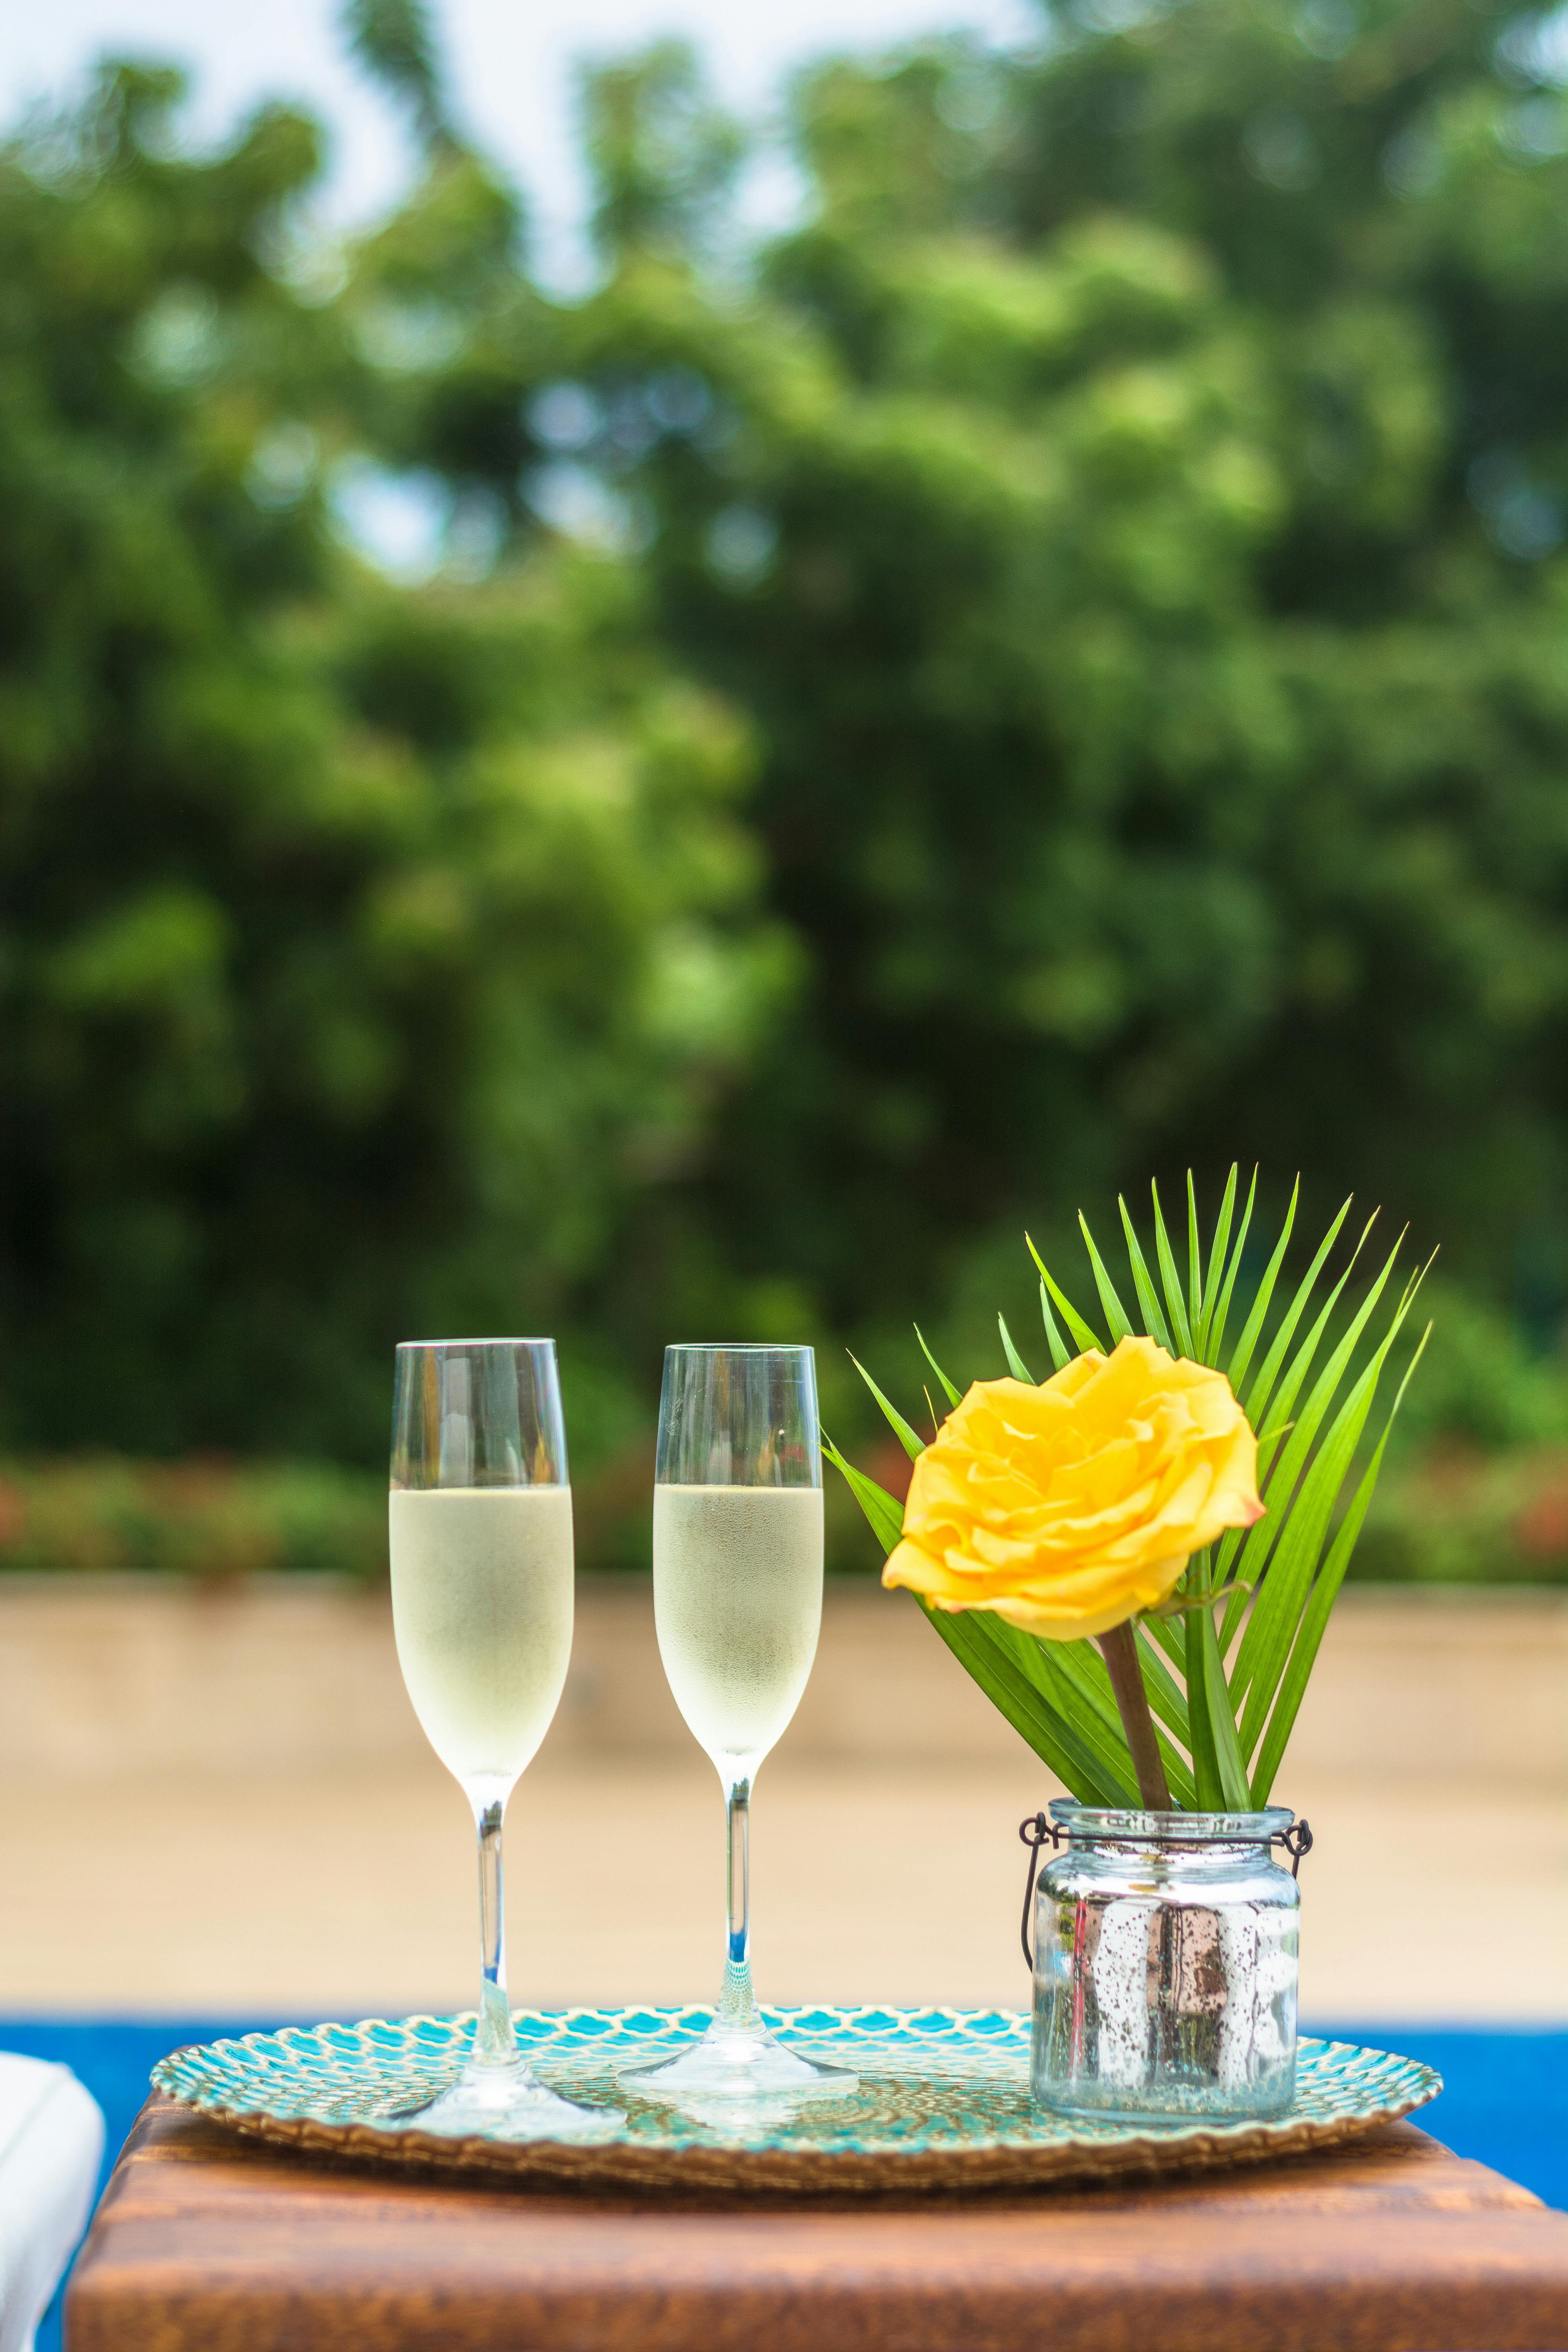 6+ Thousand Champagne Flute Glass Splash Royalty-Free Images, Stock Photos  & Pictures